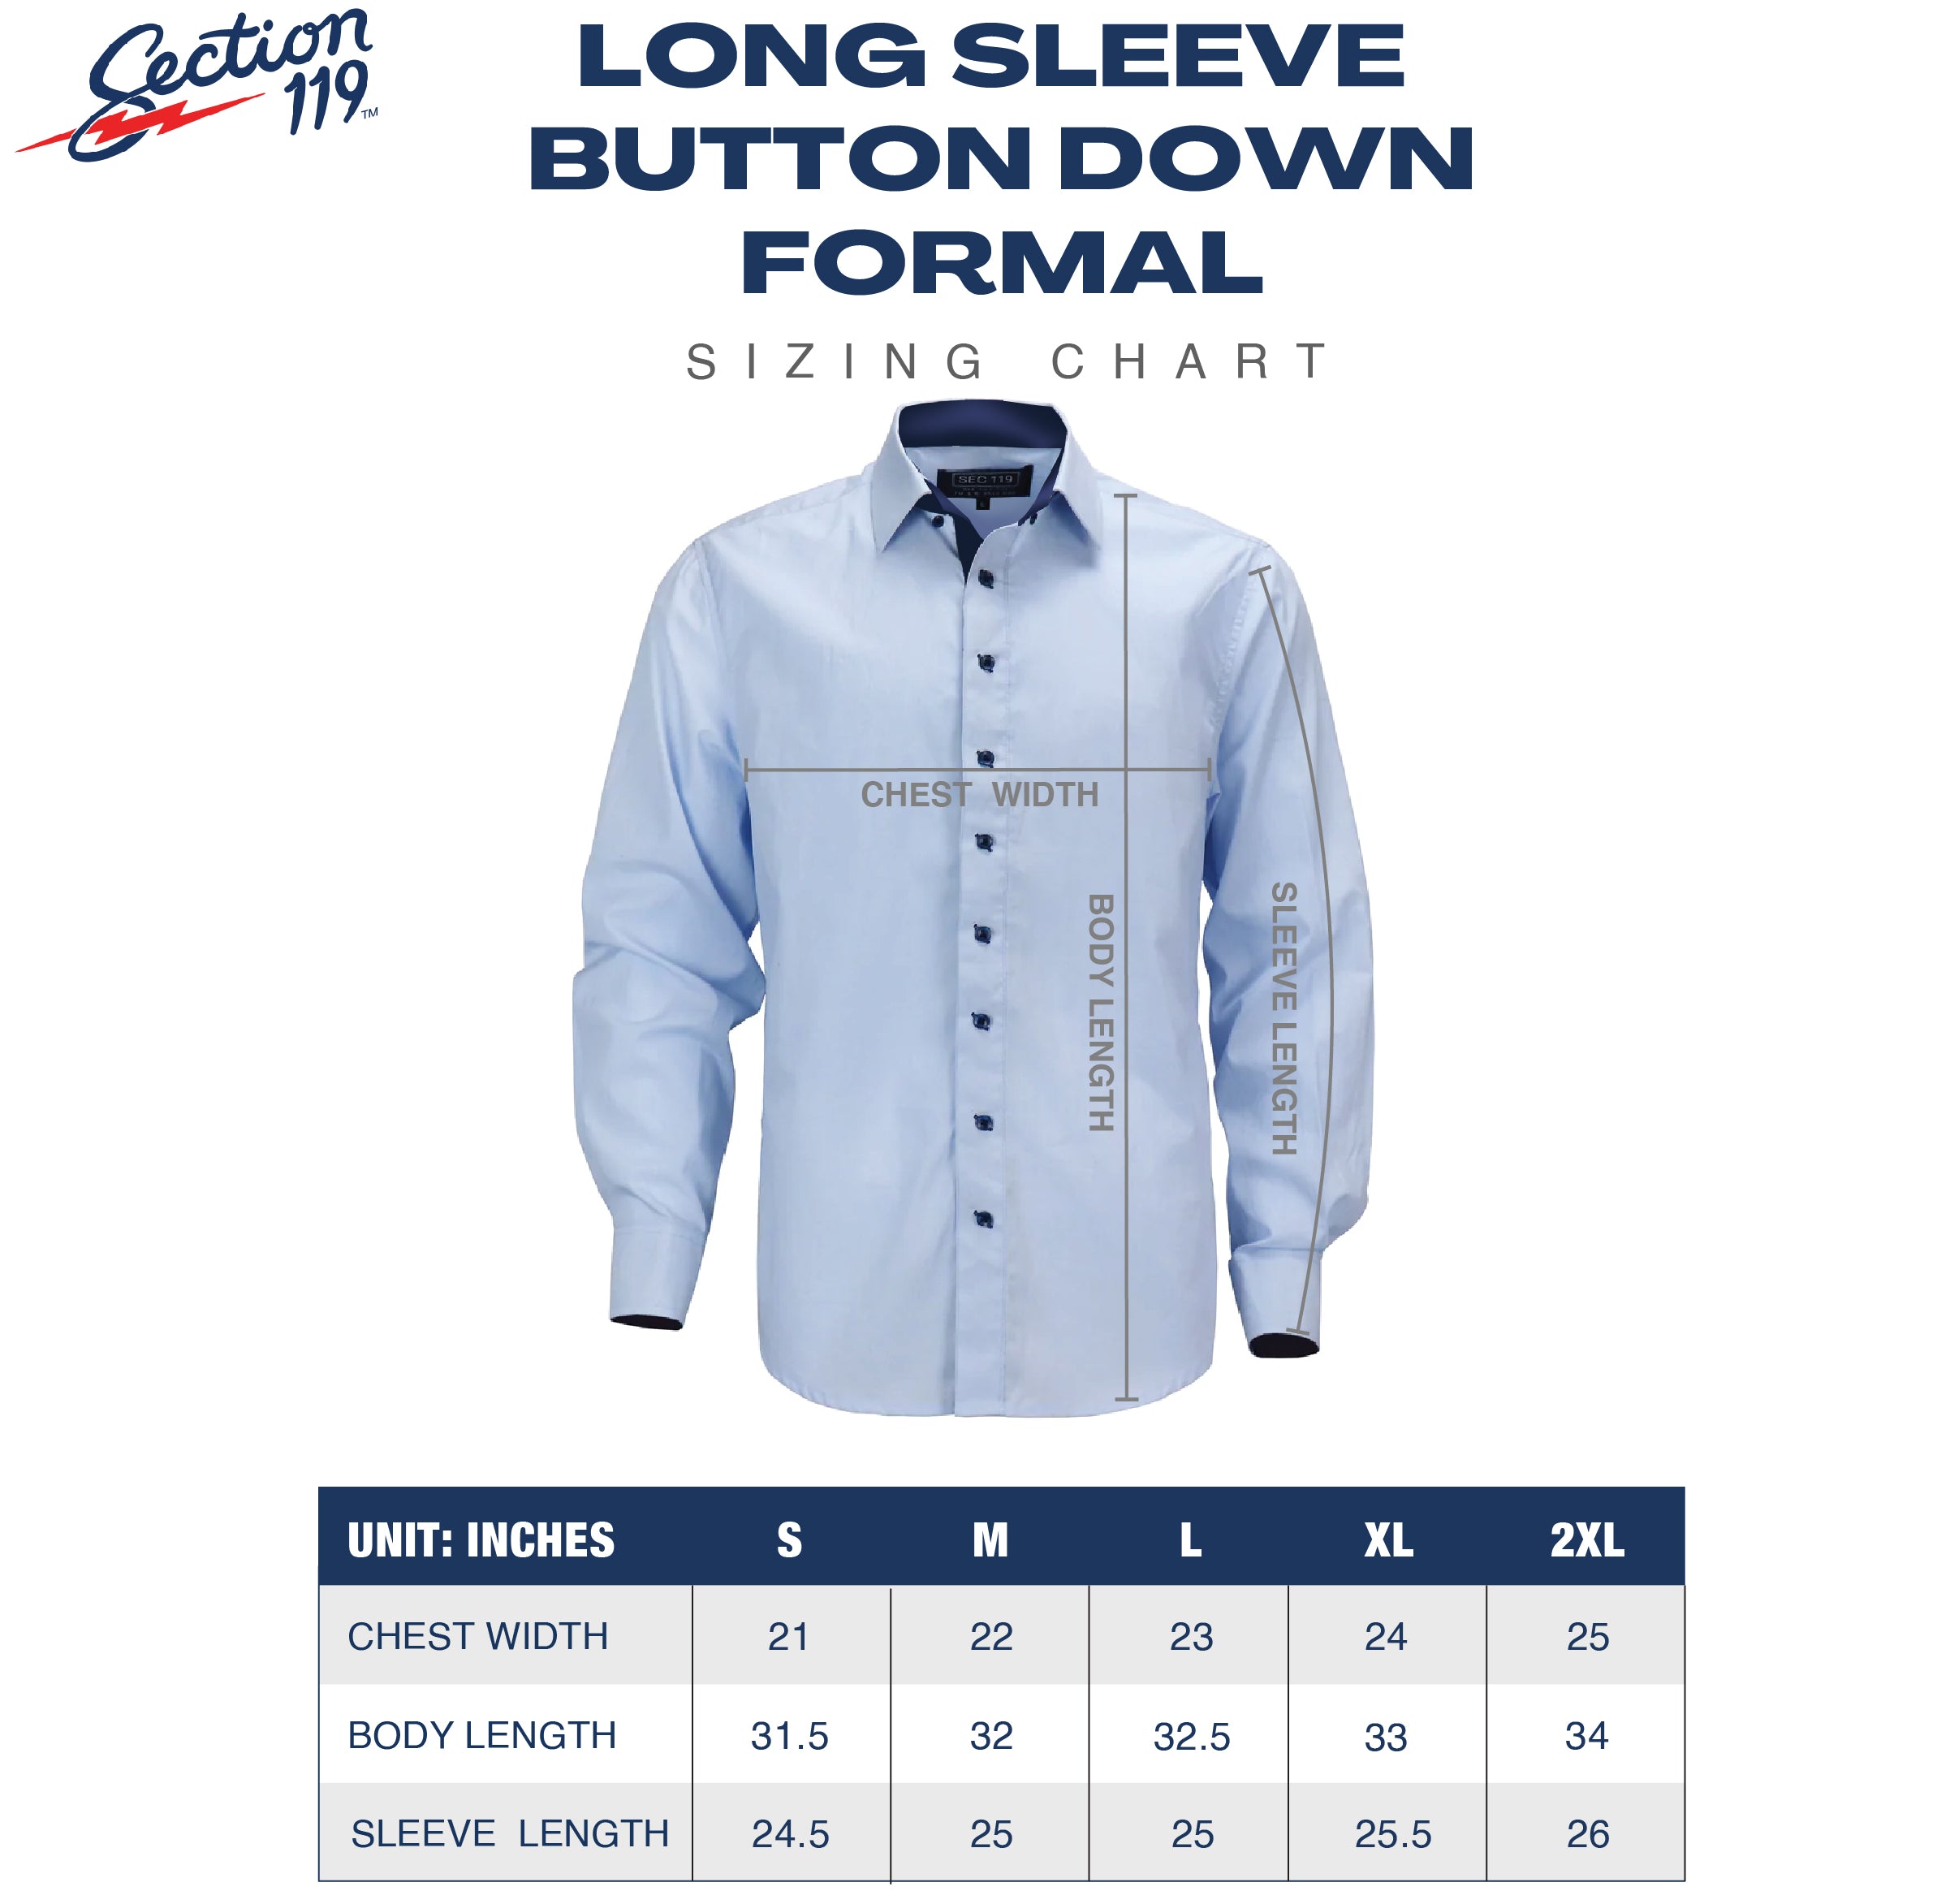 Phish Light Blue Long Sleeve Button Down - Section 119